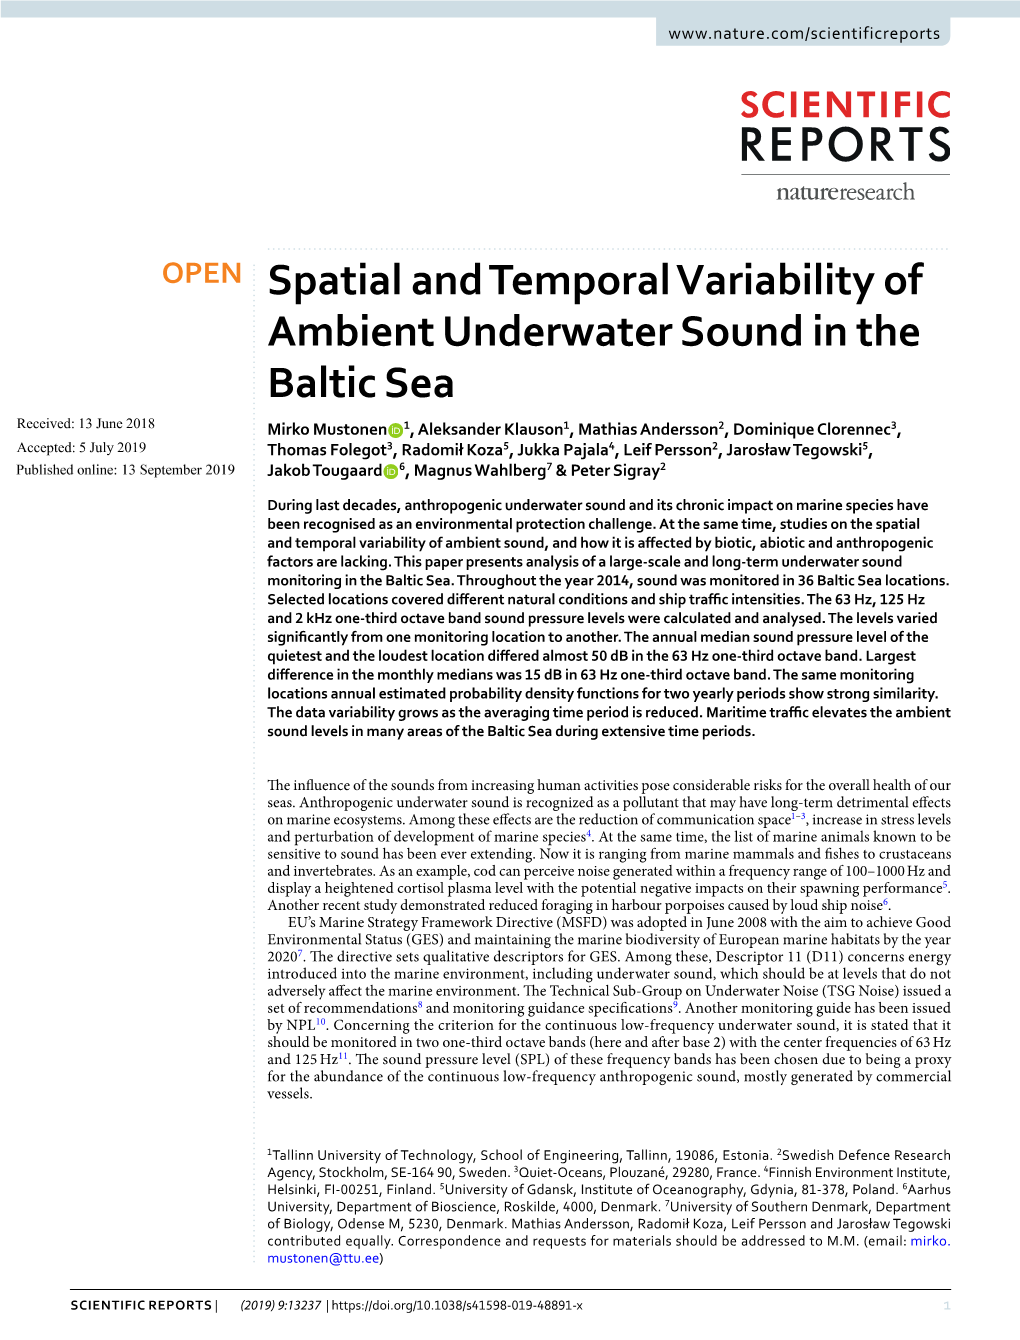 Spatial and Temporal Variability of Ambient Underwater Sound in The